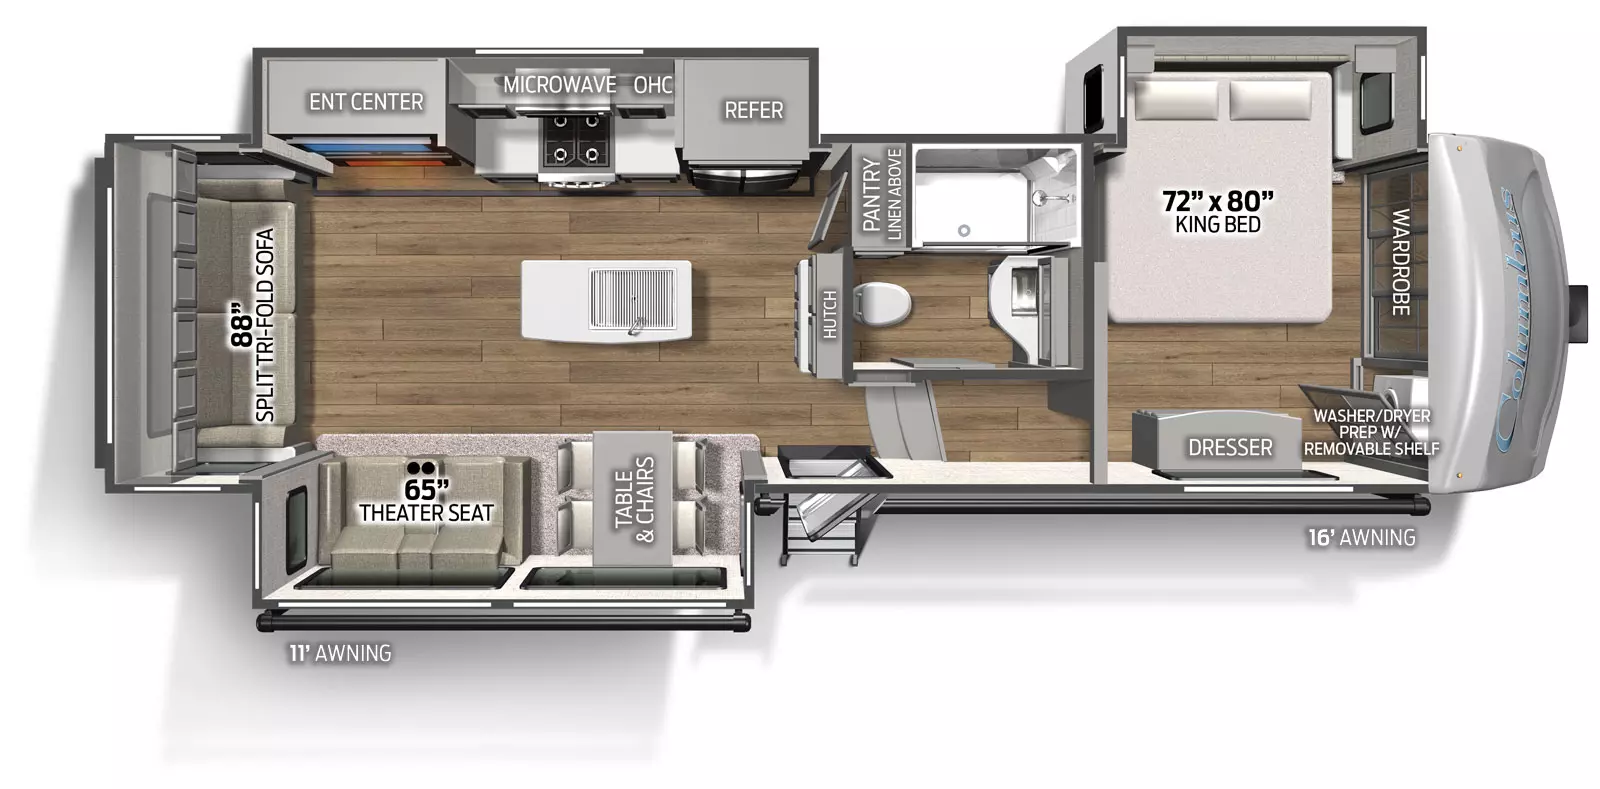 The 299RL has 3 slide outs, two on the road side and one on the camp side, along with one entry door on the camp side. Interior layout from front to back: front bedroom with king bed in the road side slide out; side aisle bathroom; kitchen living dining area with road side slide out containing cooktop and oven, overhead microwave, residential refrigerator, and TV entertainment area; the camp side slide containing freestanding table and chairs and theater seating; kitchen island with double basin sink. 